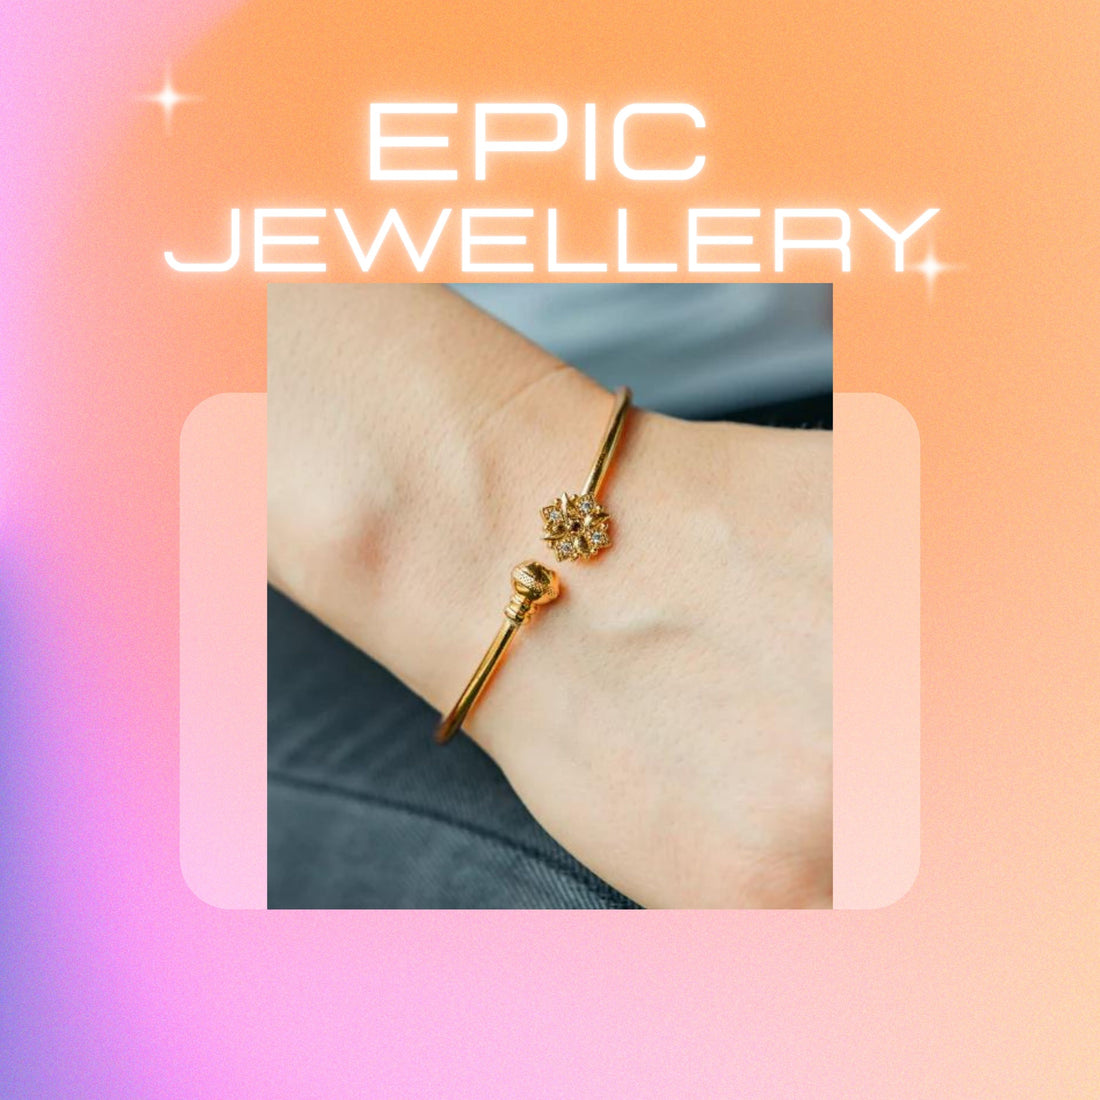 MOST EPIC JEWELLERY ITEMS TO OWN THIS FESTIVE SEASON